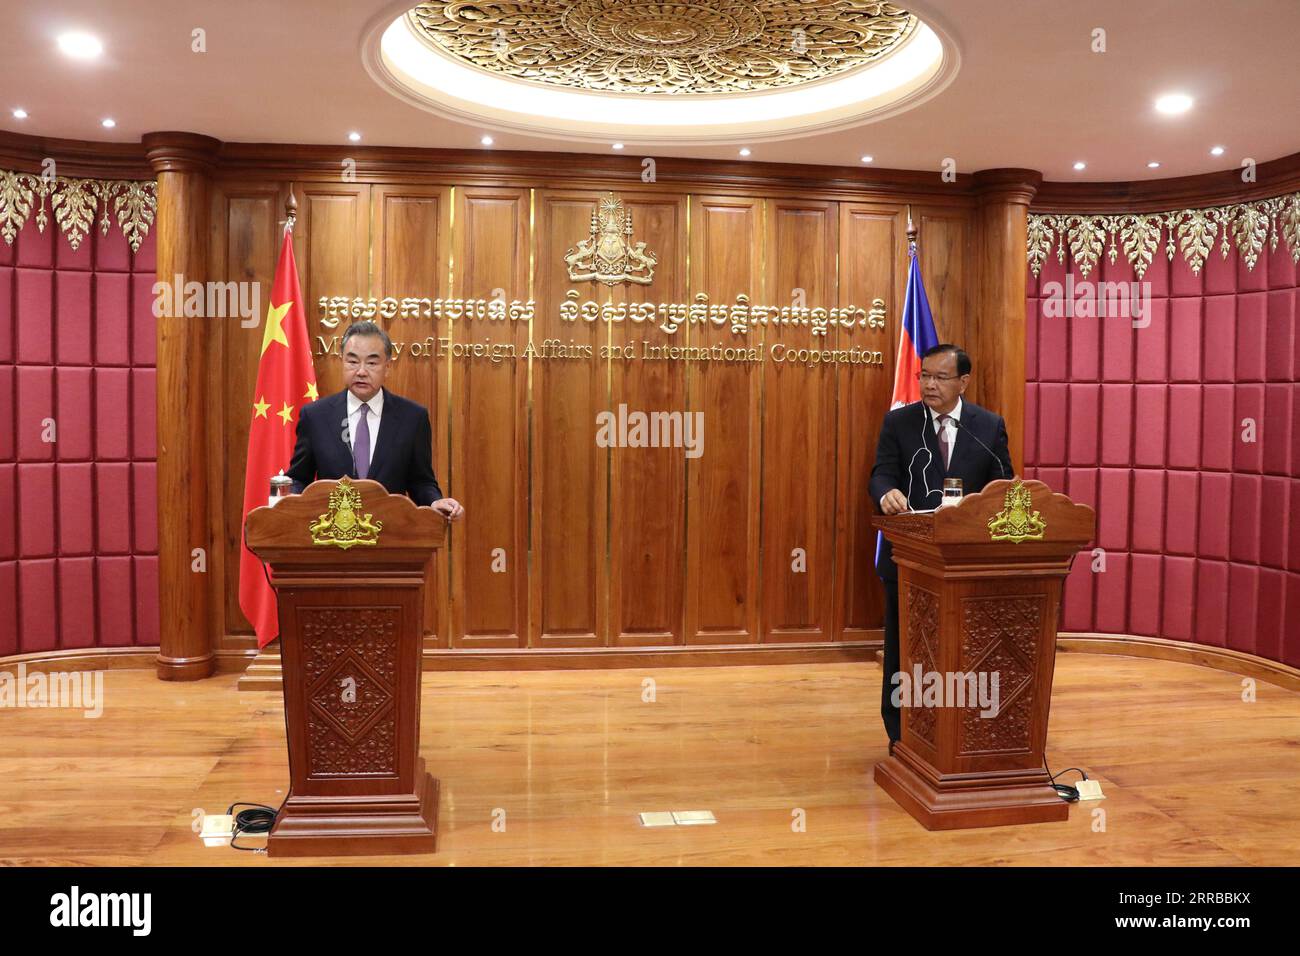 210913 -- PHNOM PENH, Sept. 13, 2021 -- Visiting Chinese State Councilor and Foreign Minister Wang Yi and Cambodian Deputy Prime Minister and Foreign Minister Prak Sokhonn attend a joint press conference after their meeting in Phnom Penh, Cambodia, Sept. 12, 2021.  CAMBODIA-PHNOM PENH-WANG YI-PRESS CONFERENCE MaoxPengfei PUBLICATIONxNOTxINxCHN Stock Photo